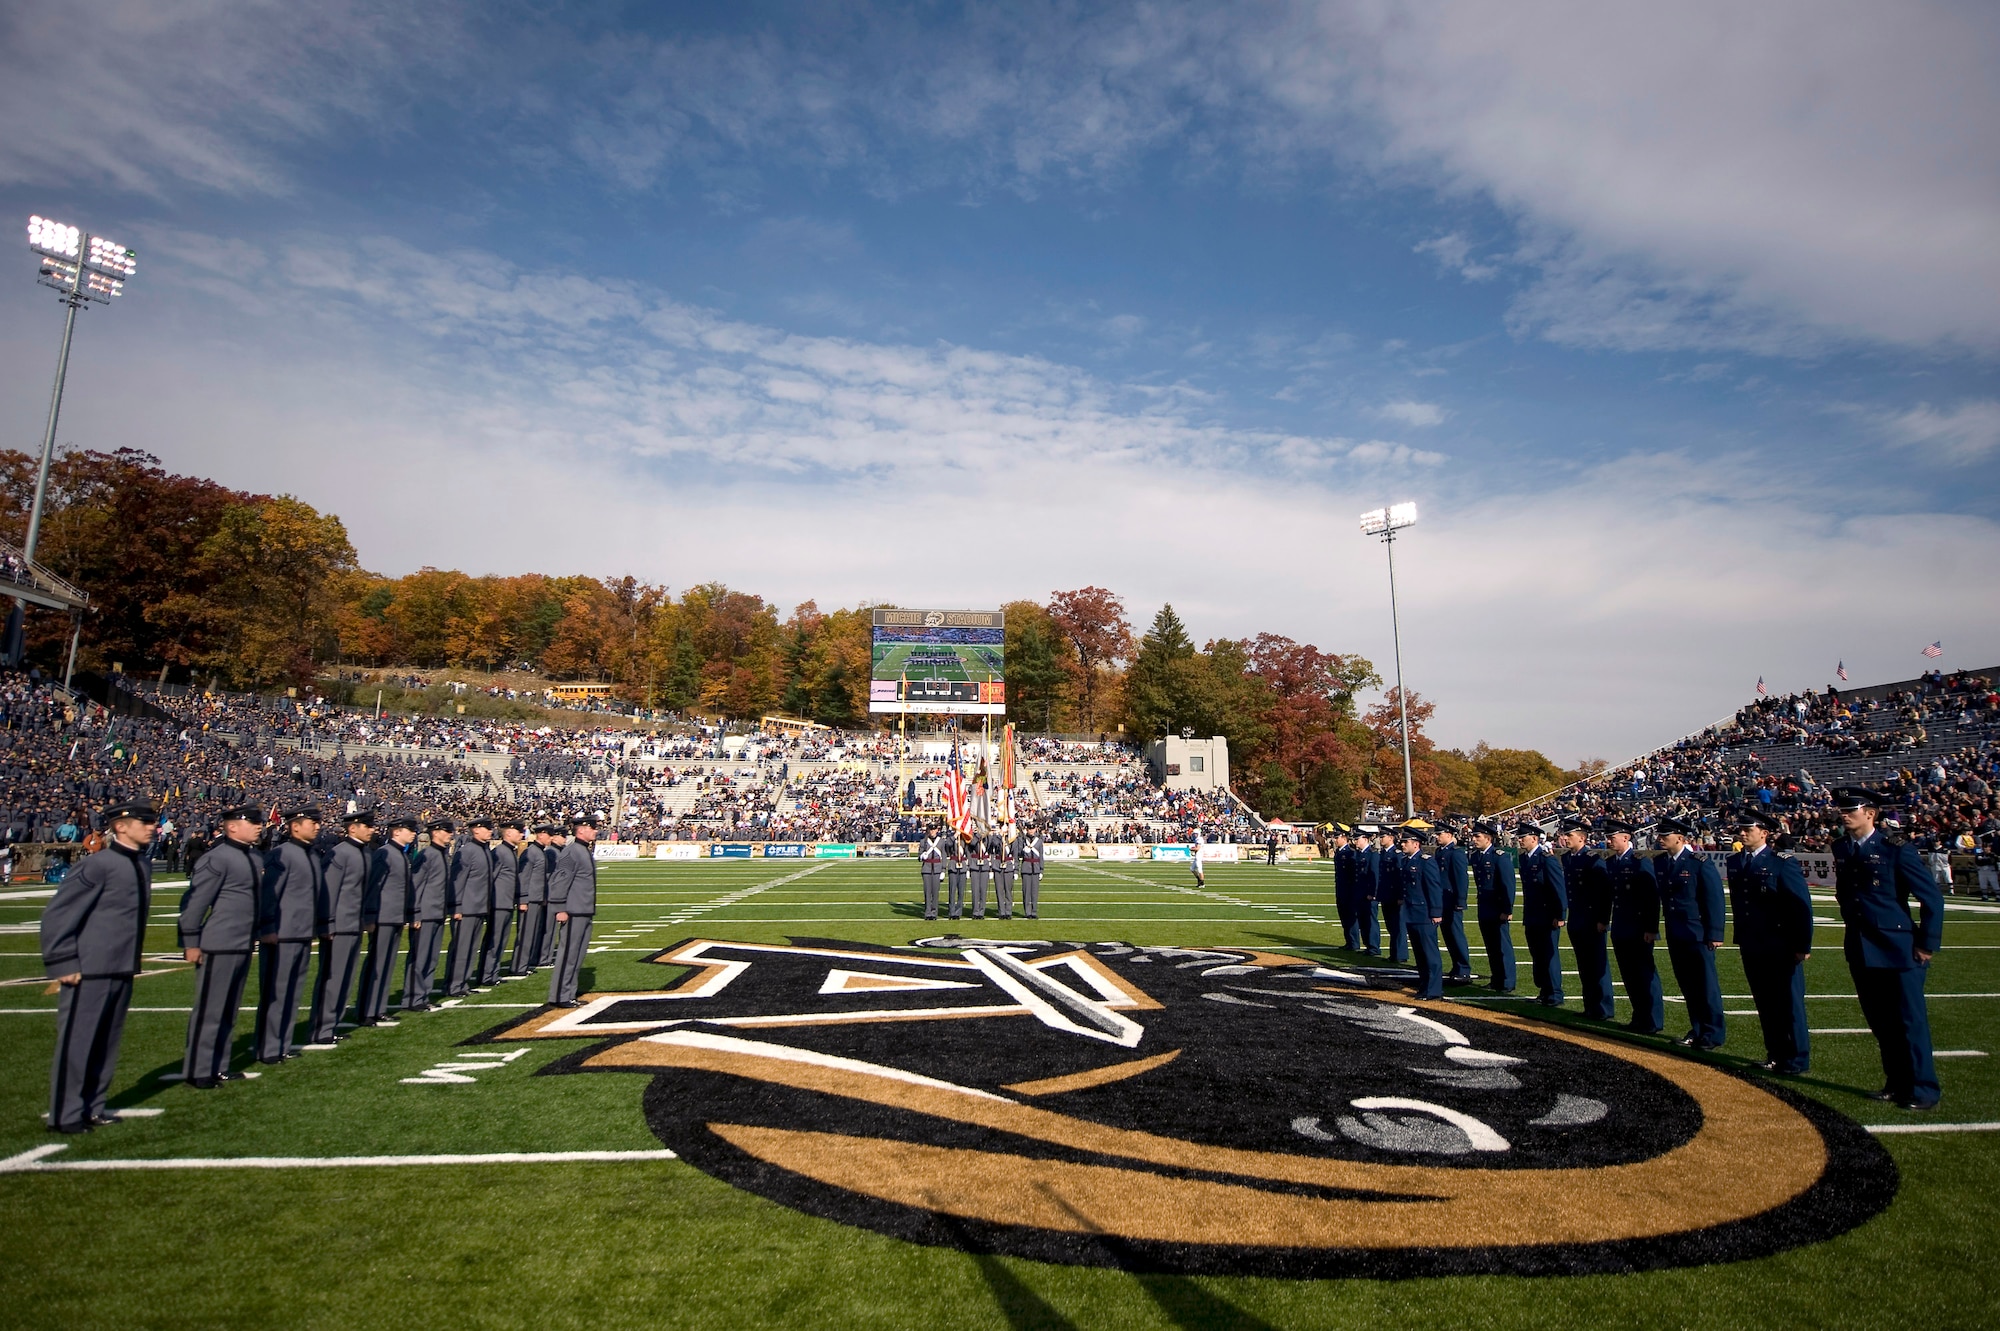 Cadets of the U.S. Military Academy and U.S. Air Force Academy face off prior to kickoff in their annual battle in which Air Force defeated Army 16-7 Nov. 1 at West Point, N.Y. (Defense Department photo/Navy Petty Officer 1st Class Chad J. McNeeley) 
